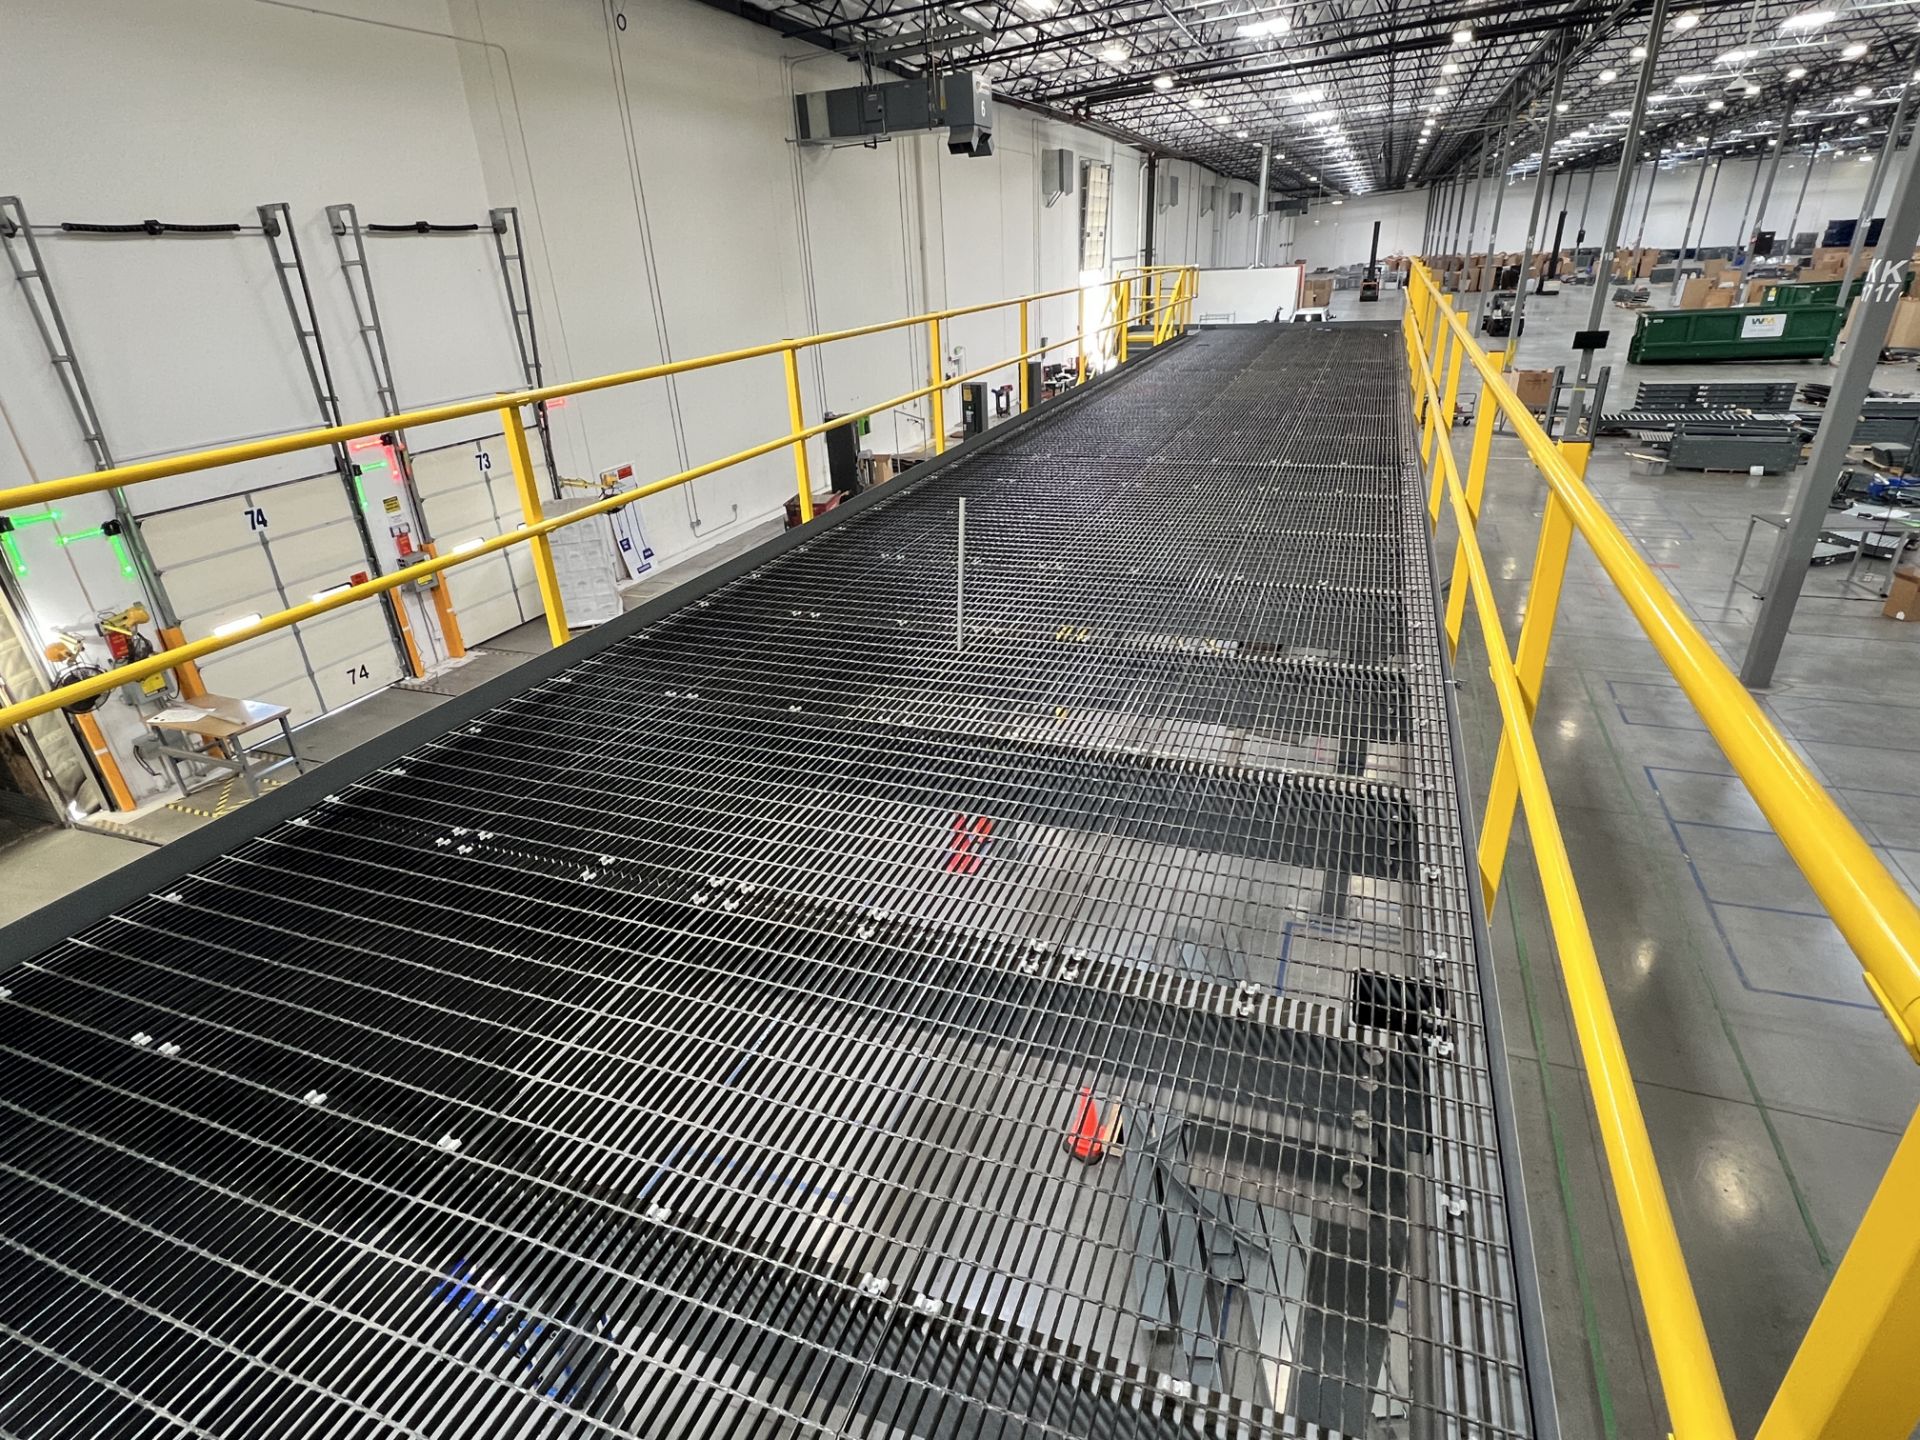 Steele Solutions Mezzanine - Down, Banded and Ready to be Loaded!! - Image 3 of 12